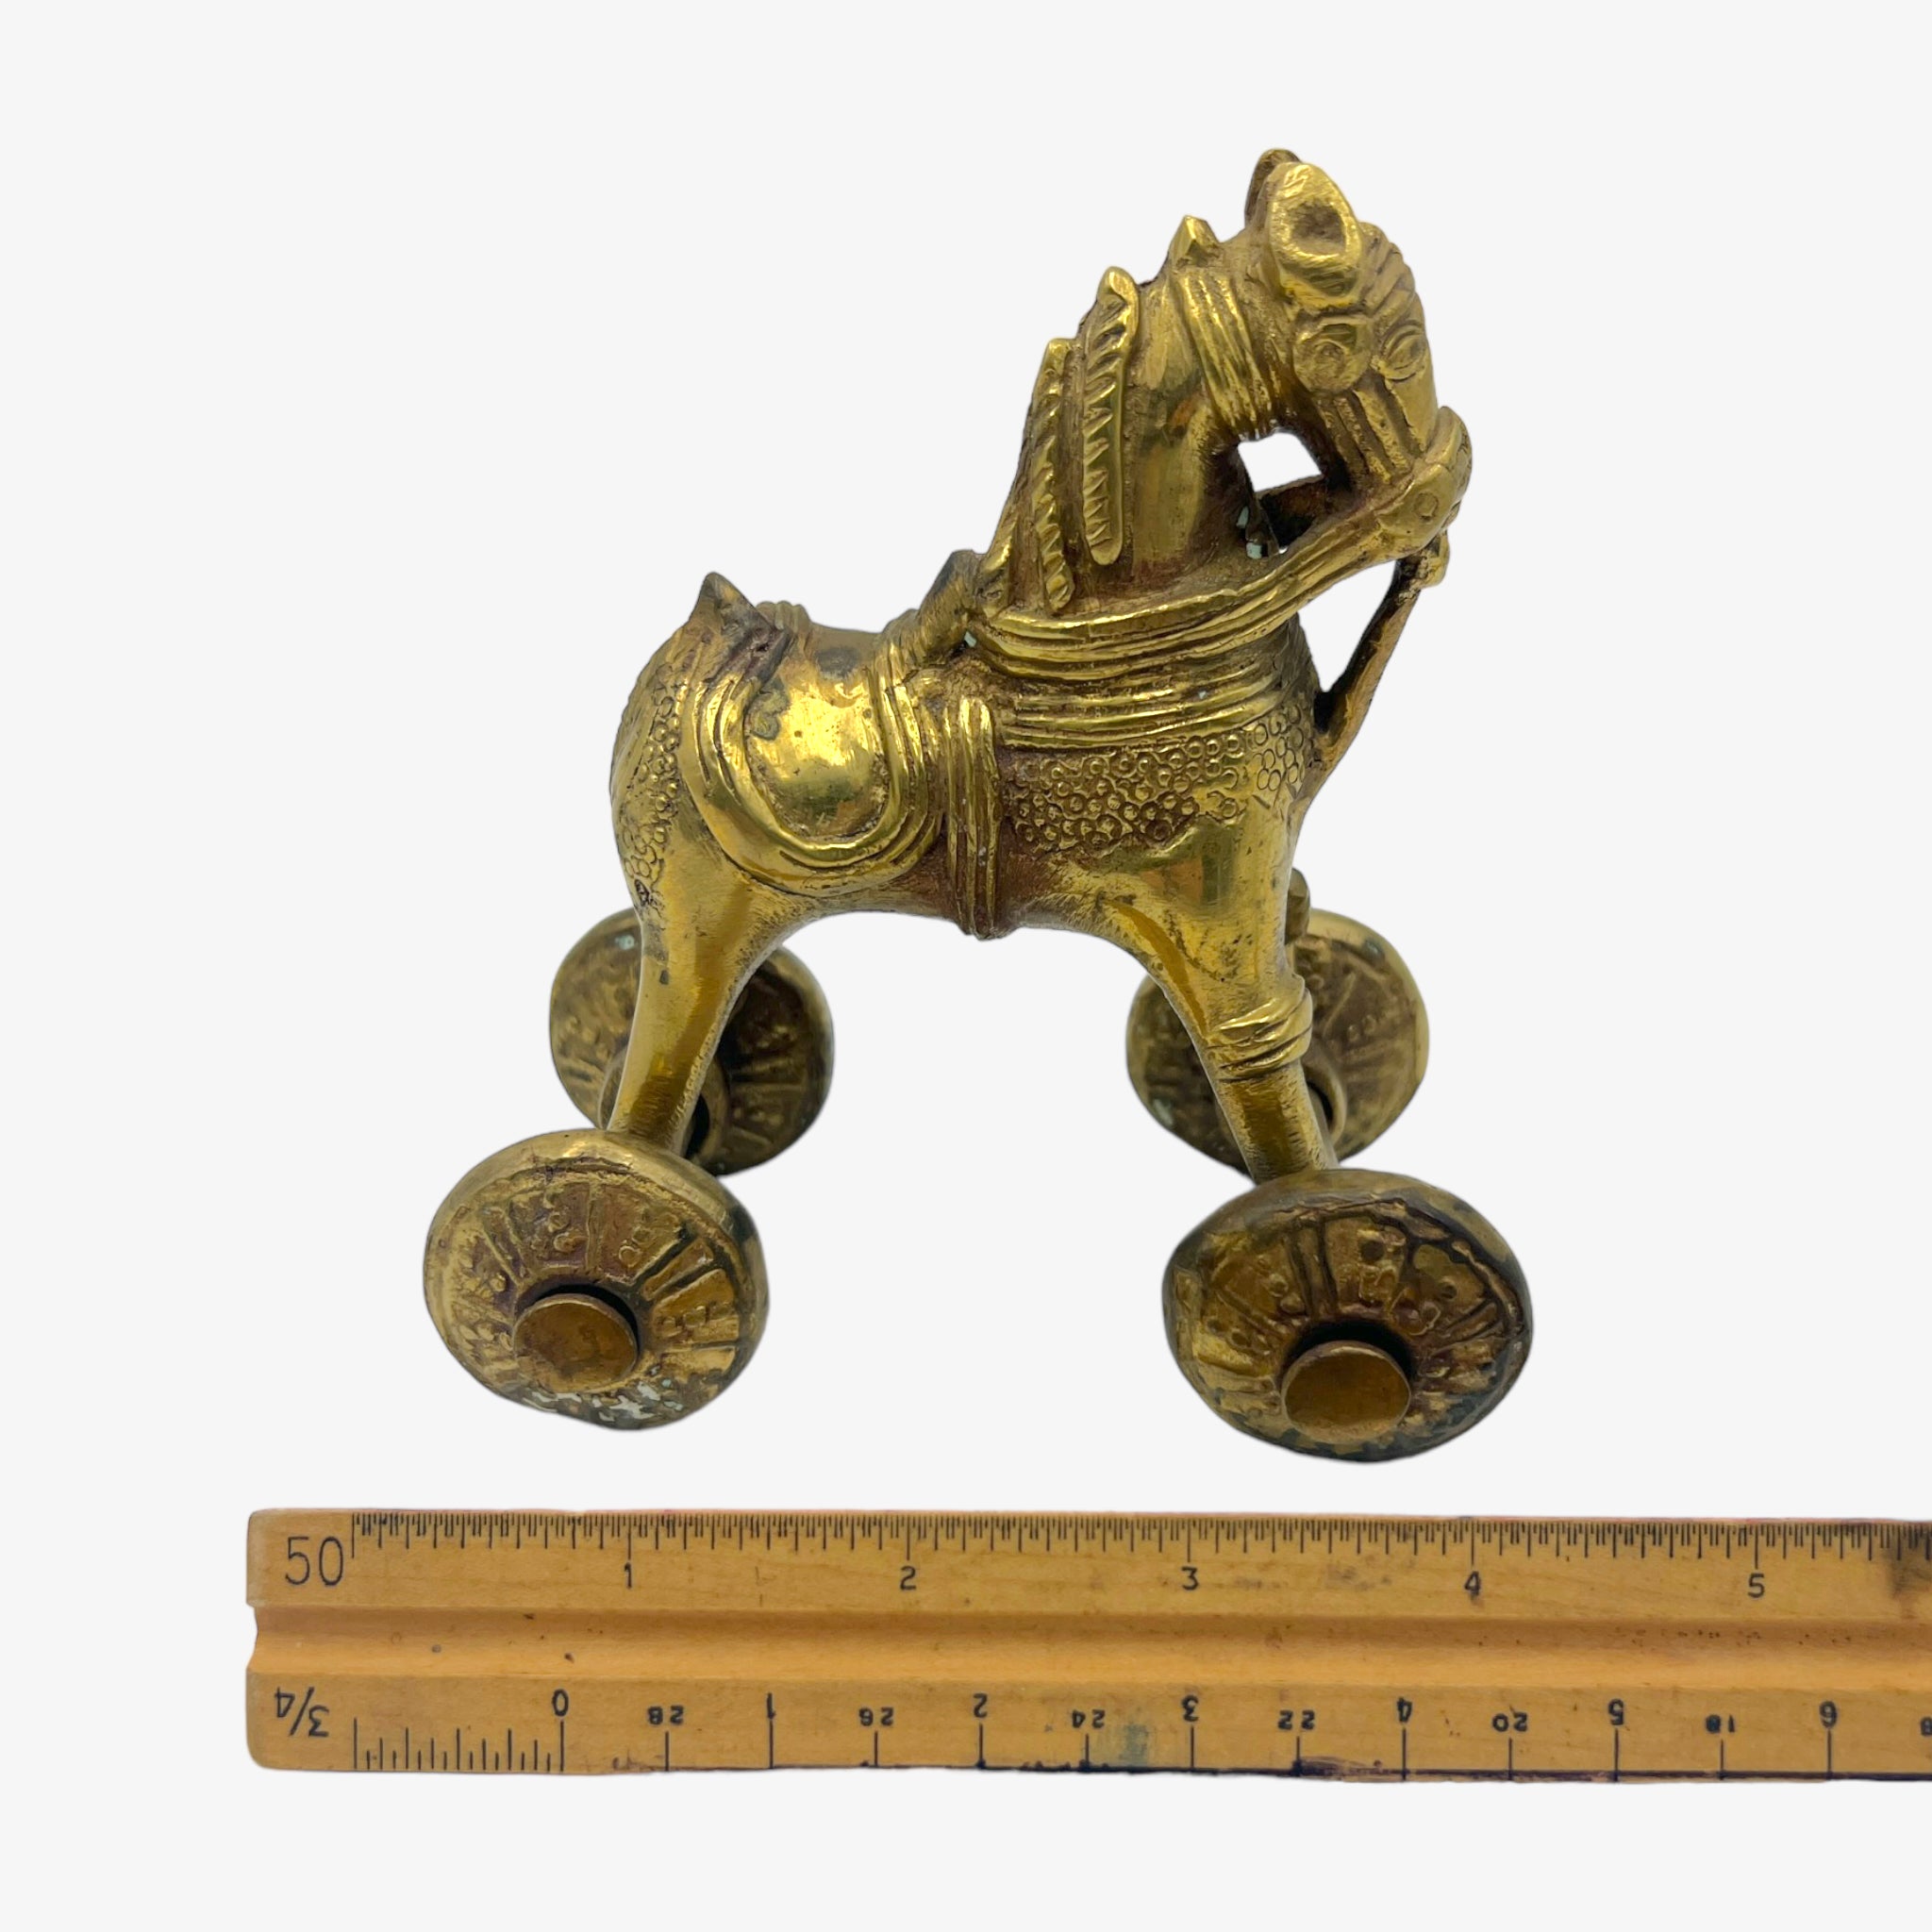 Antique Brass Horse Temple Toy From India